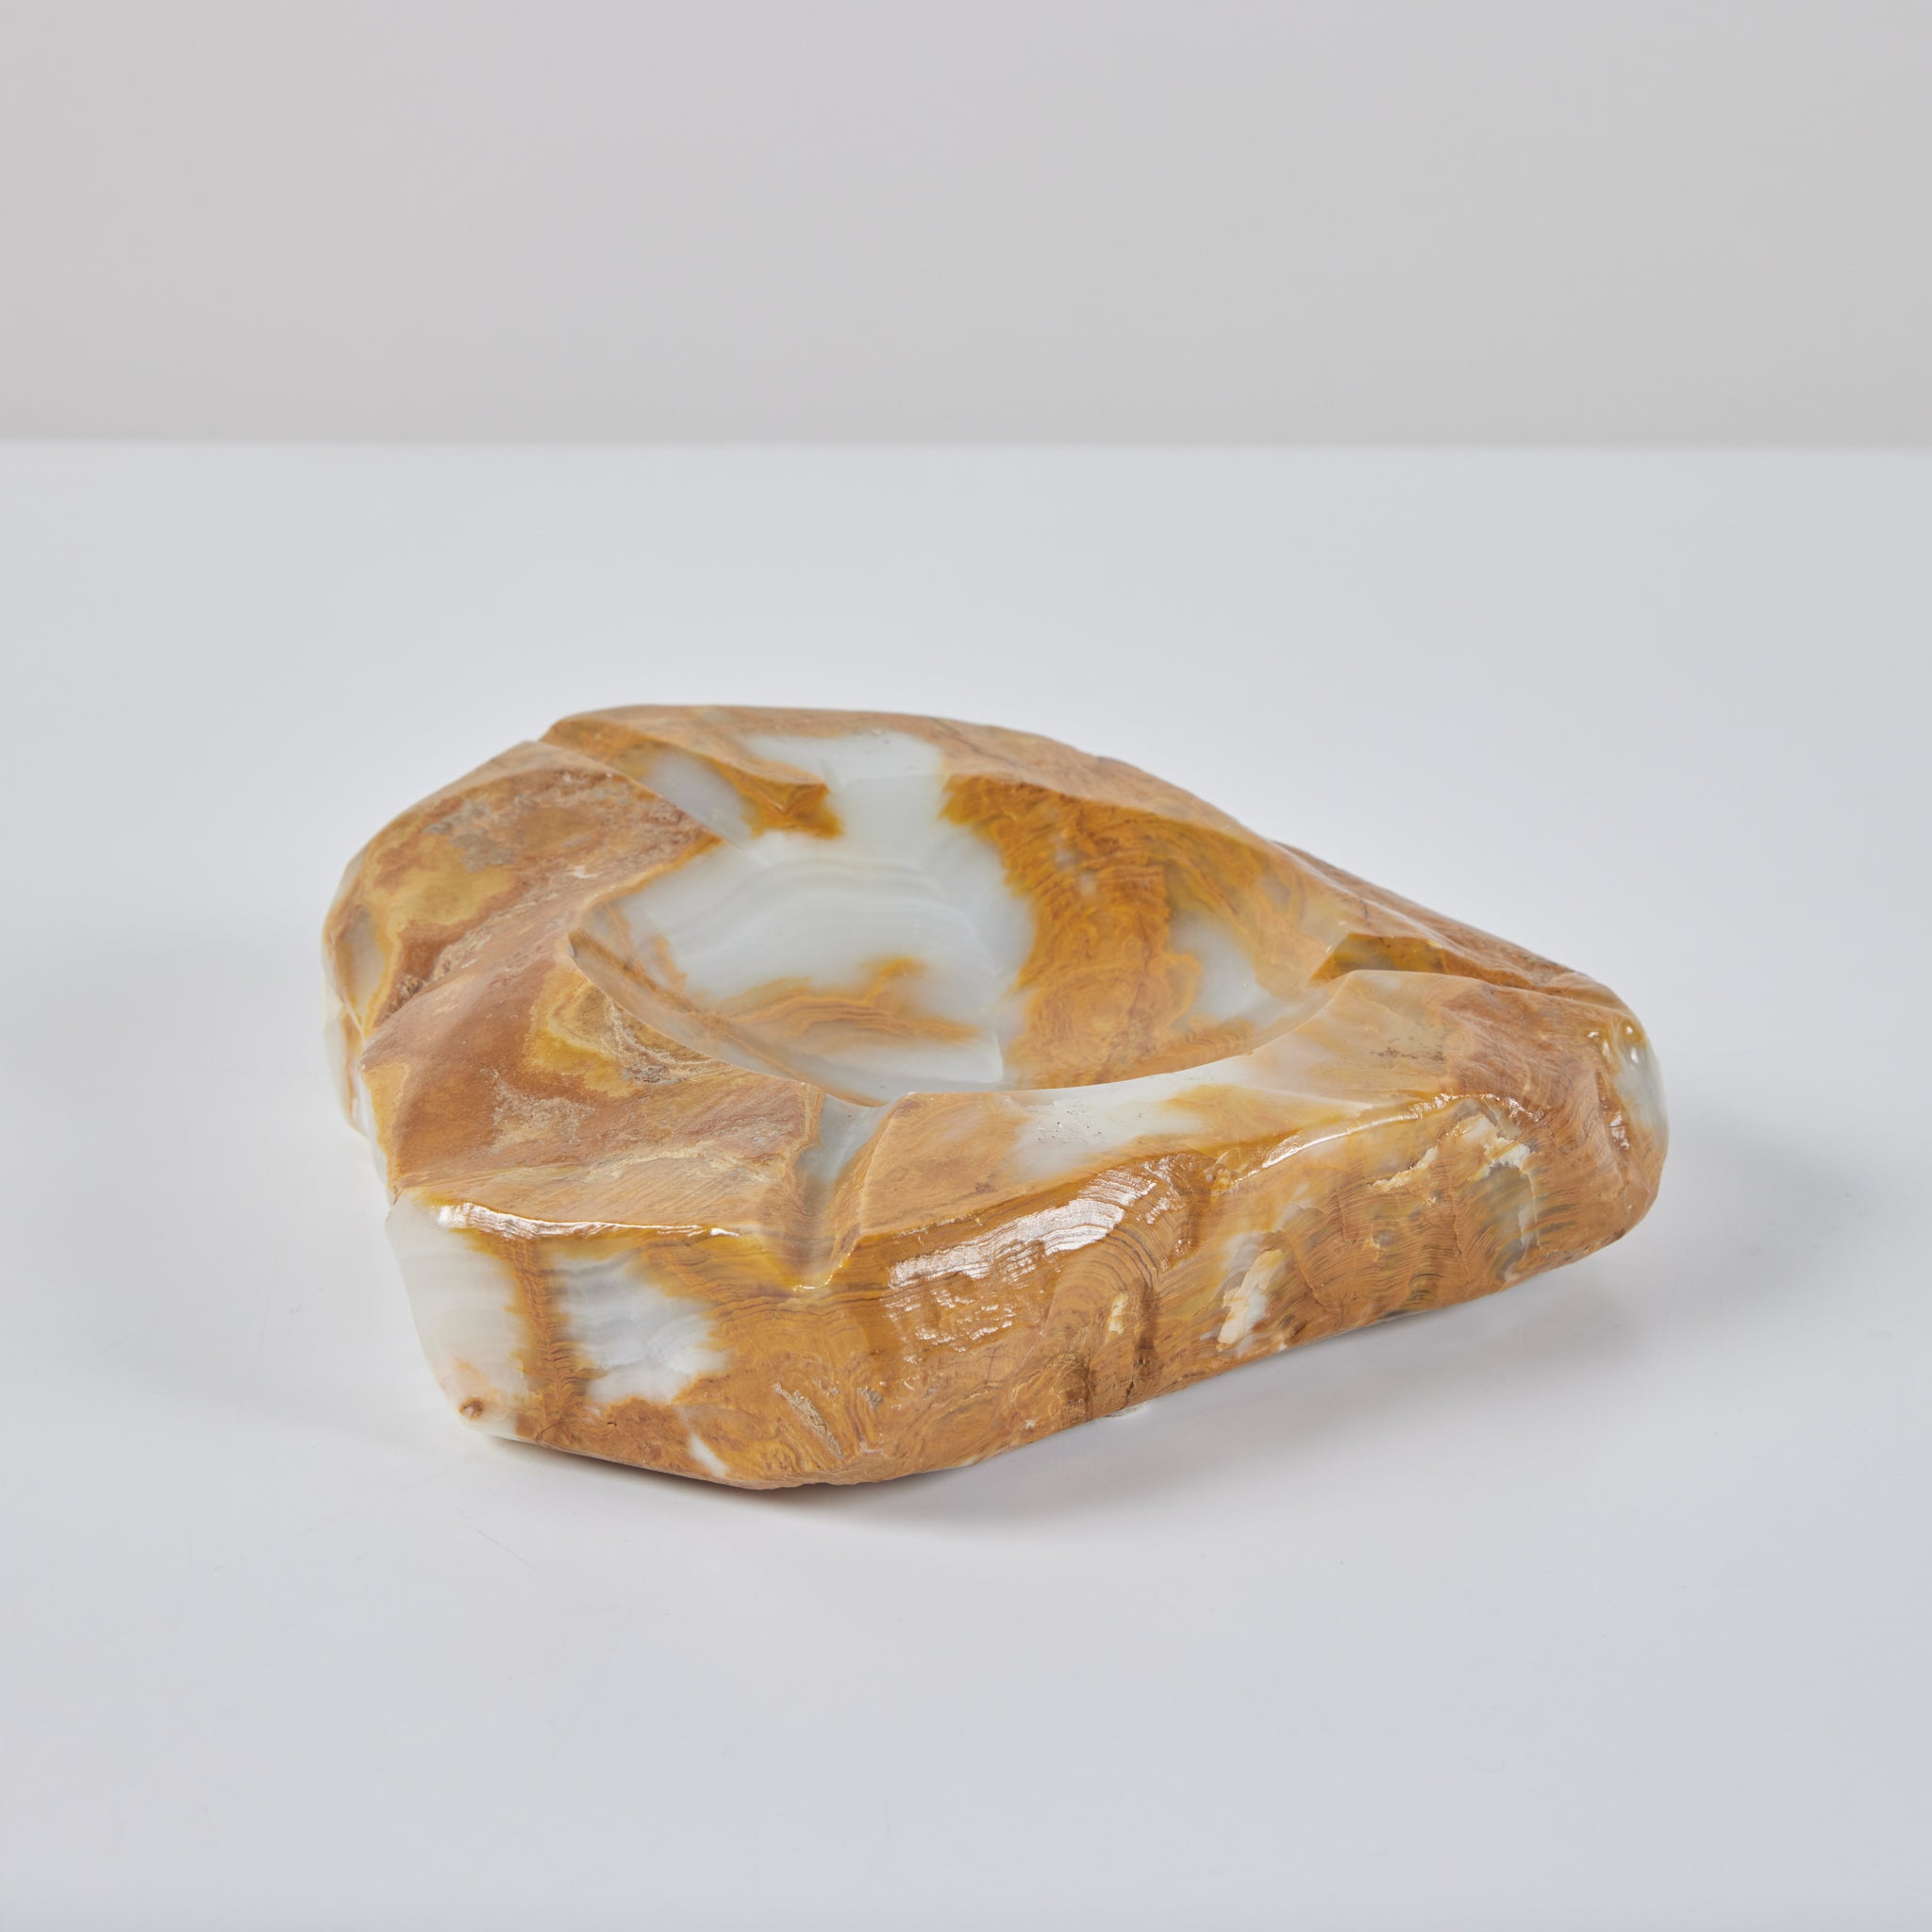 Brutalist Hand Carved Onyx Ashtray